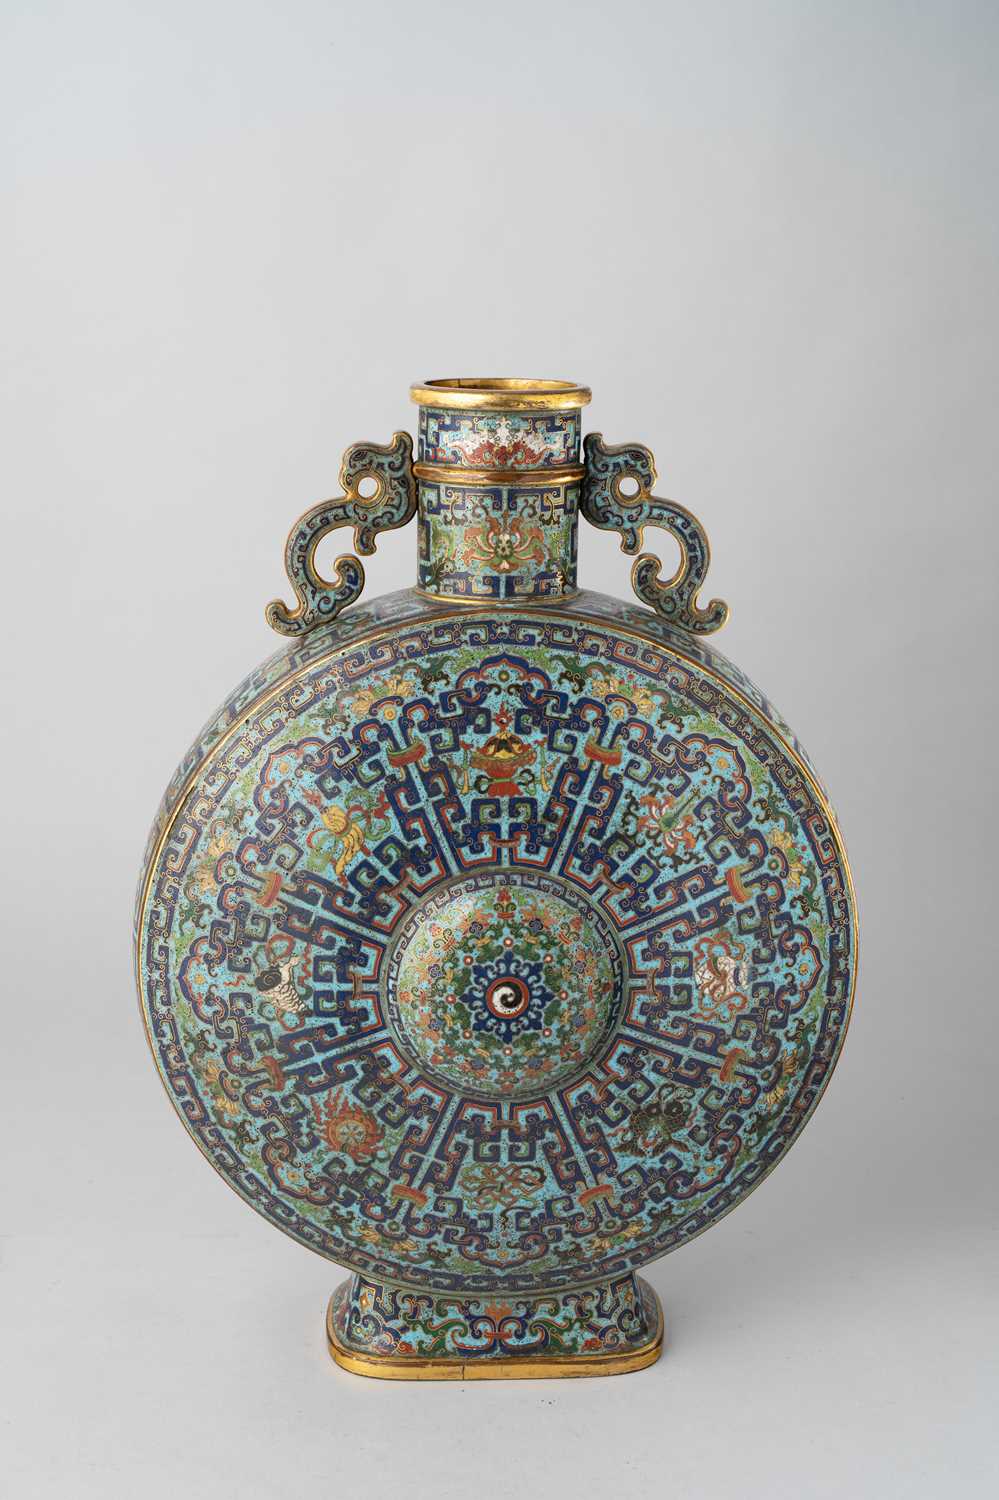 A LARGE CHINESE CLOISONNE ENAMEL 'BAJIXIANG' MOONFLASK, BIANHU QING DYNASTY OR LATER Each side